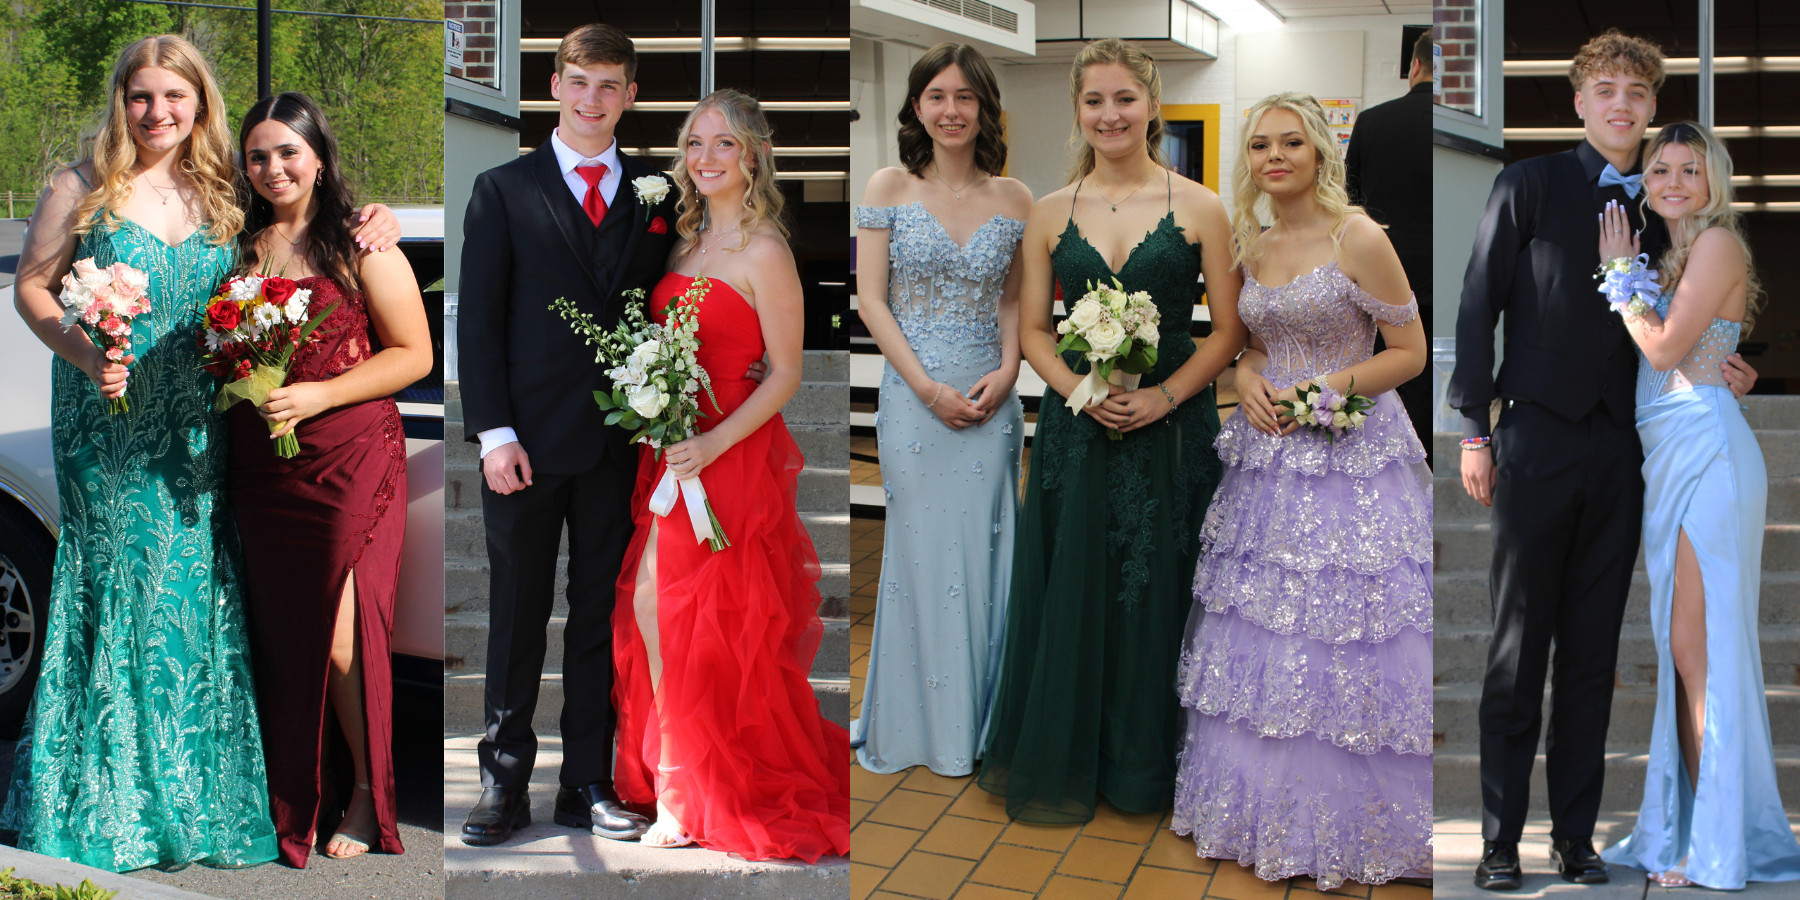 students dress up for the prom